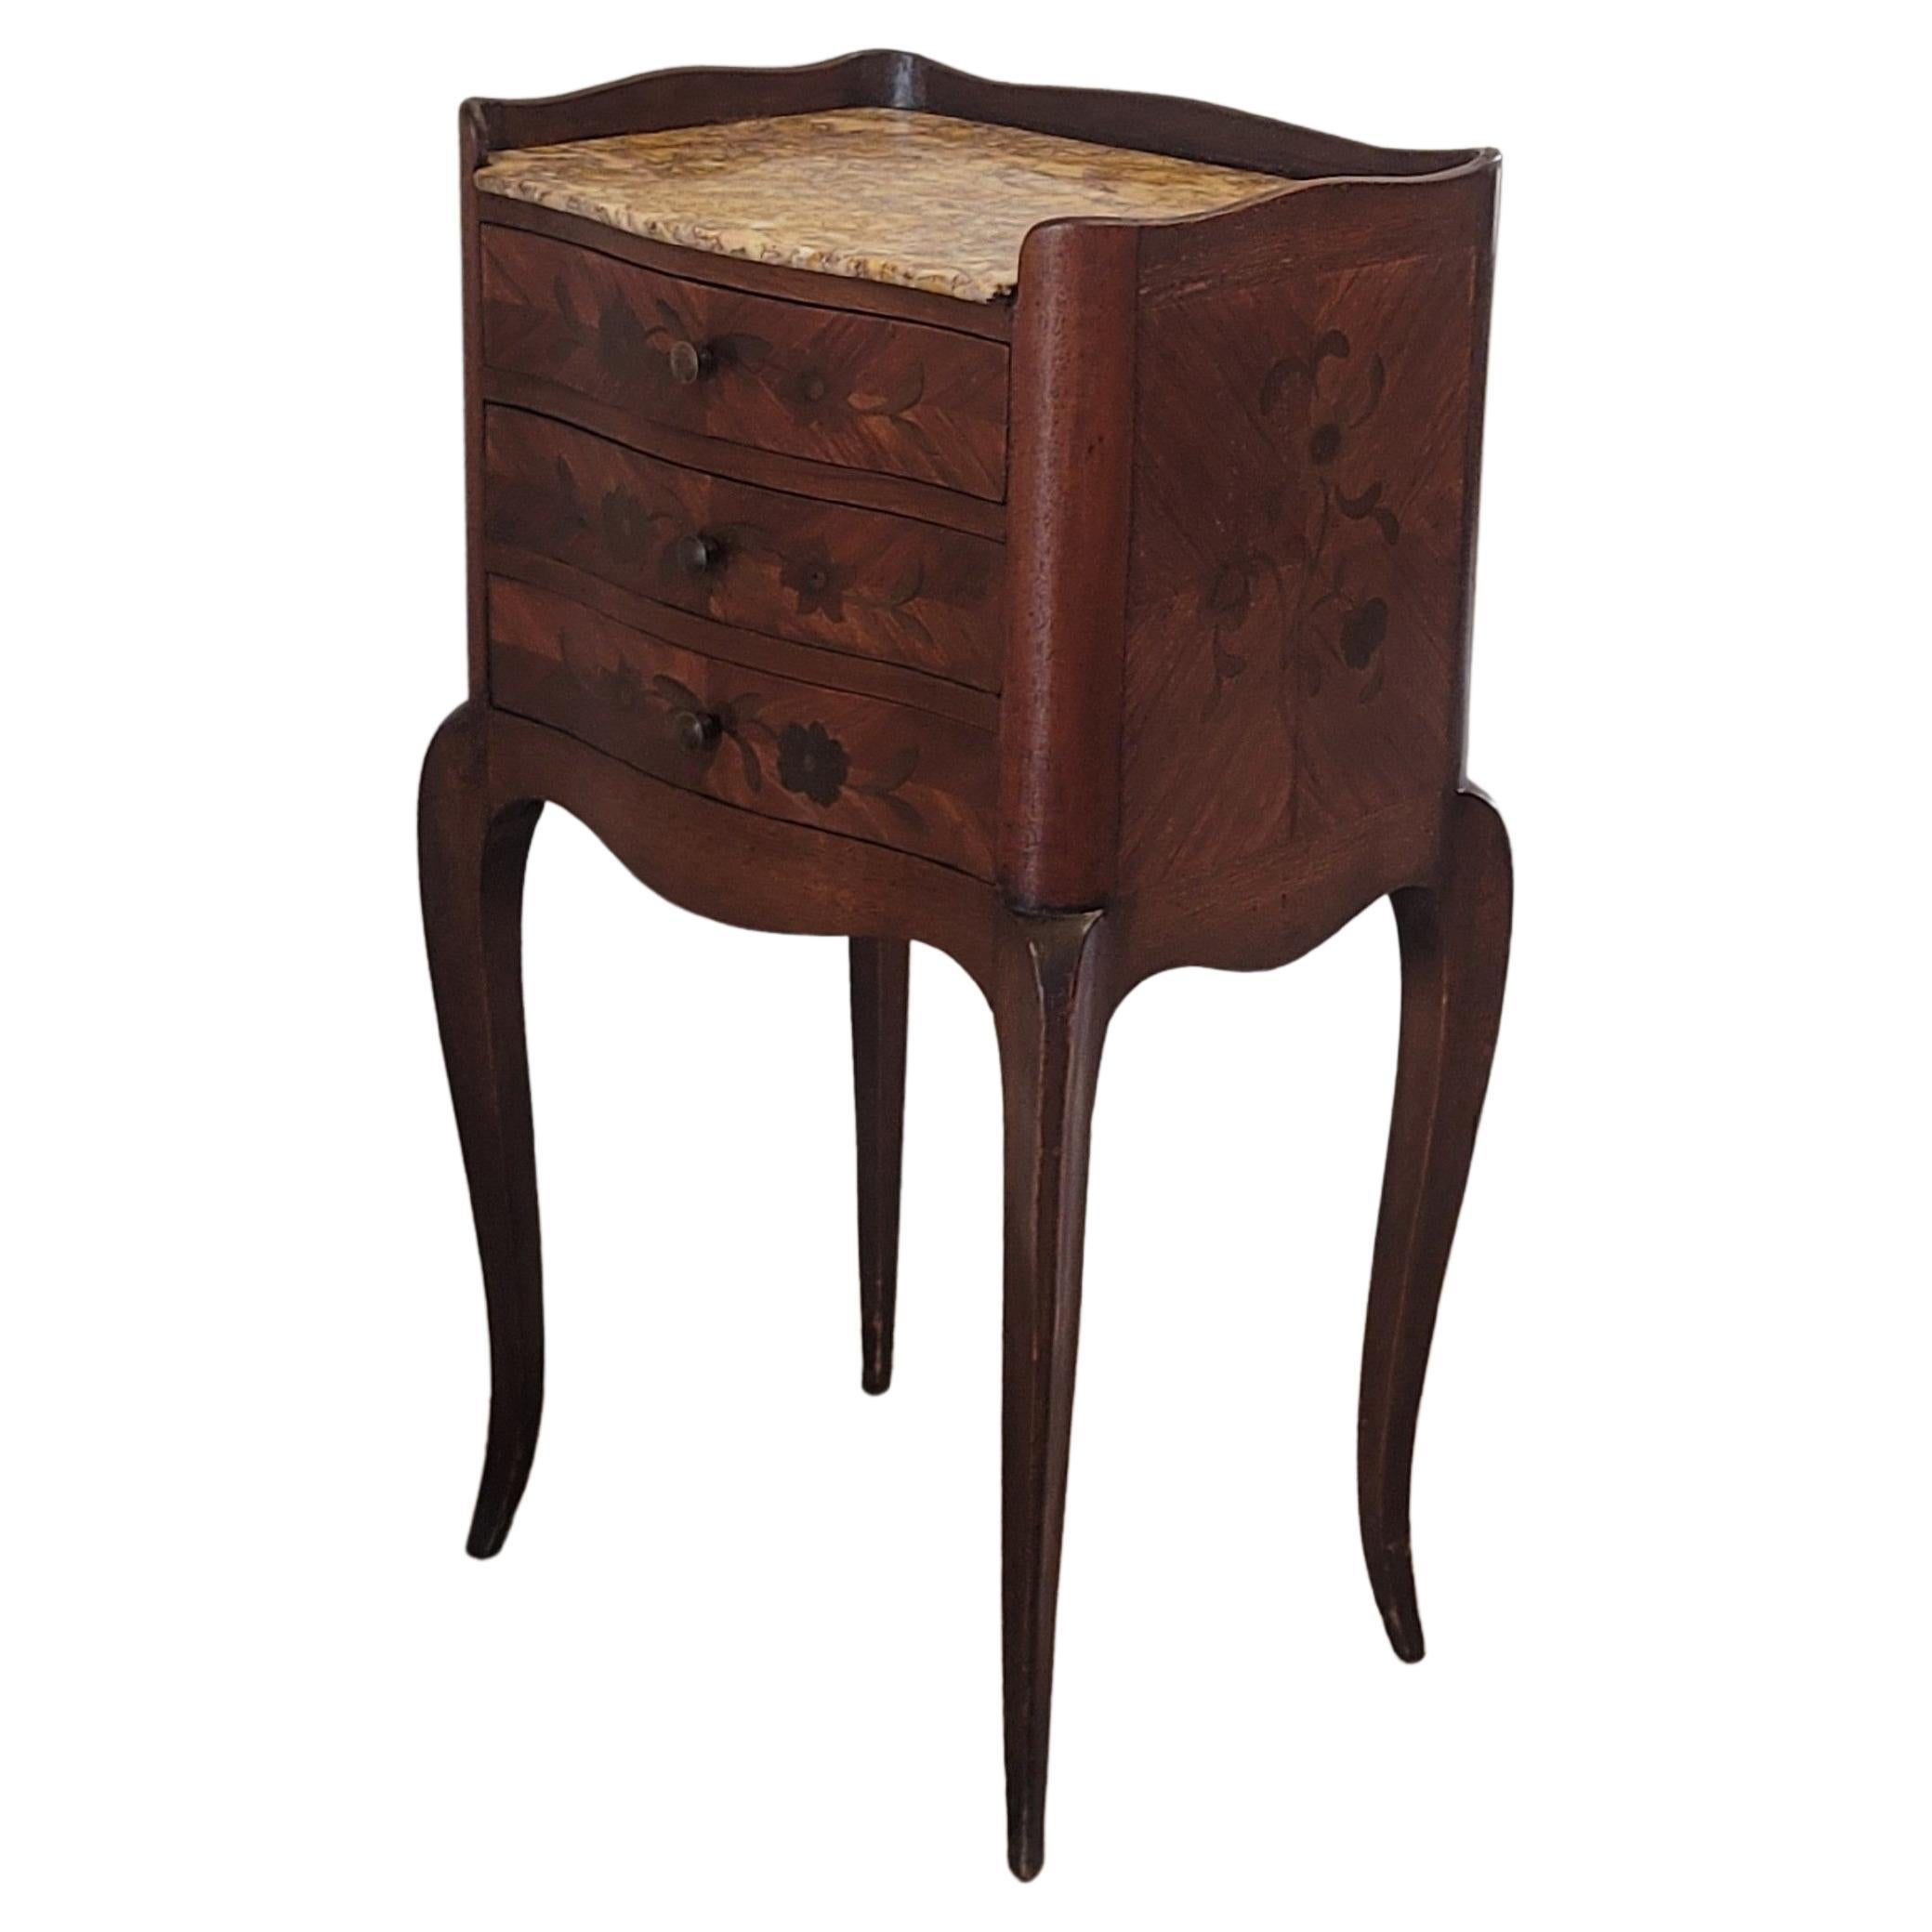 19th Century French Louis XV Style Marquetry Inlaid Nightstand Table For Sale